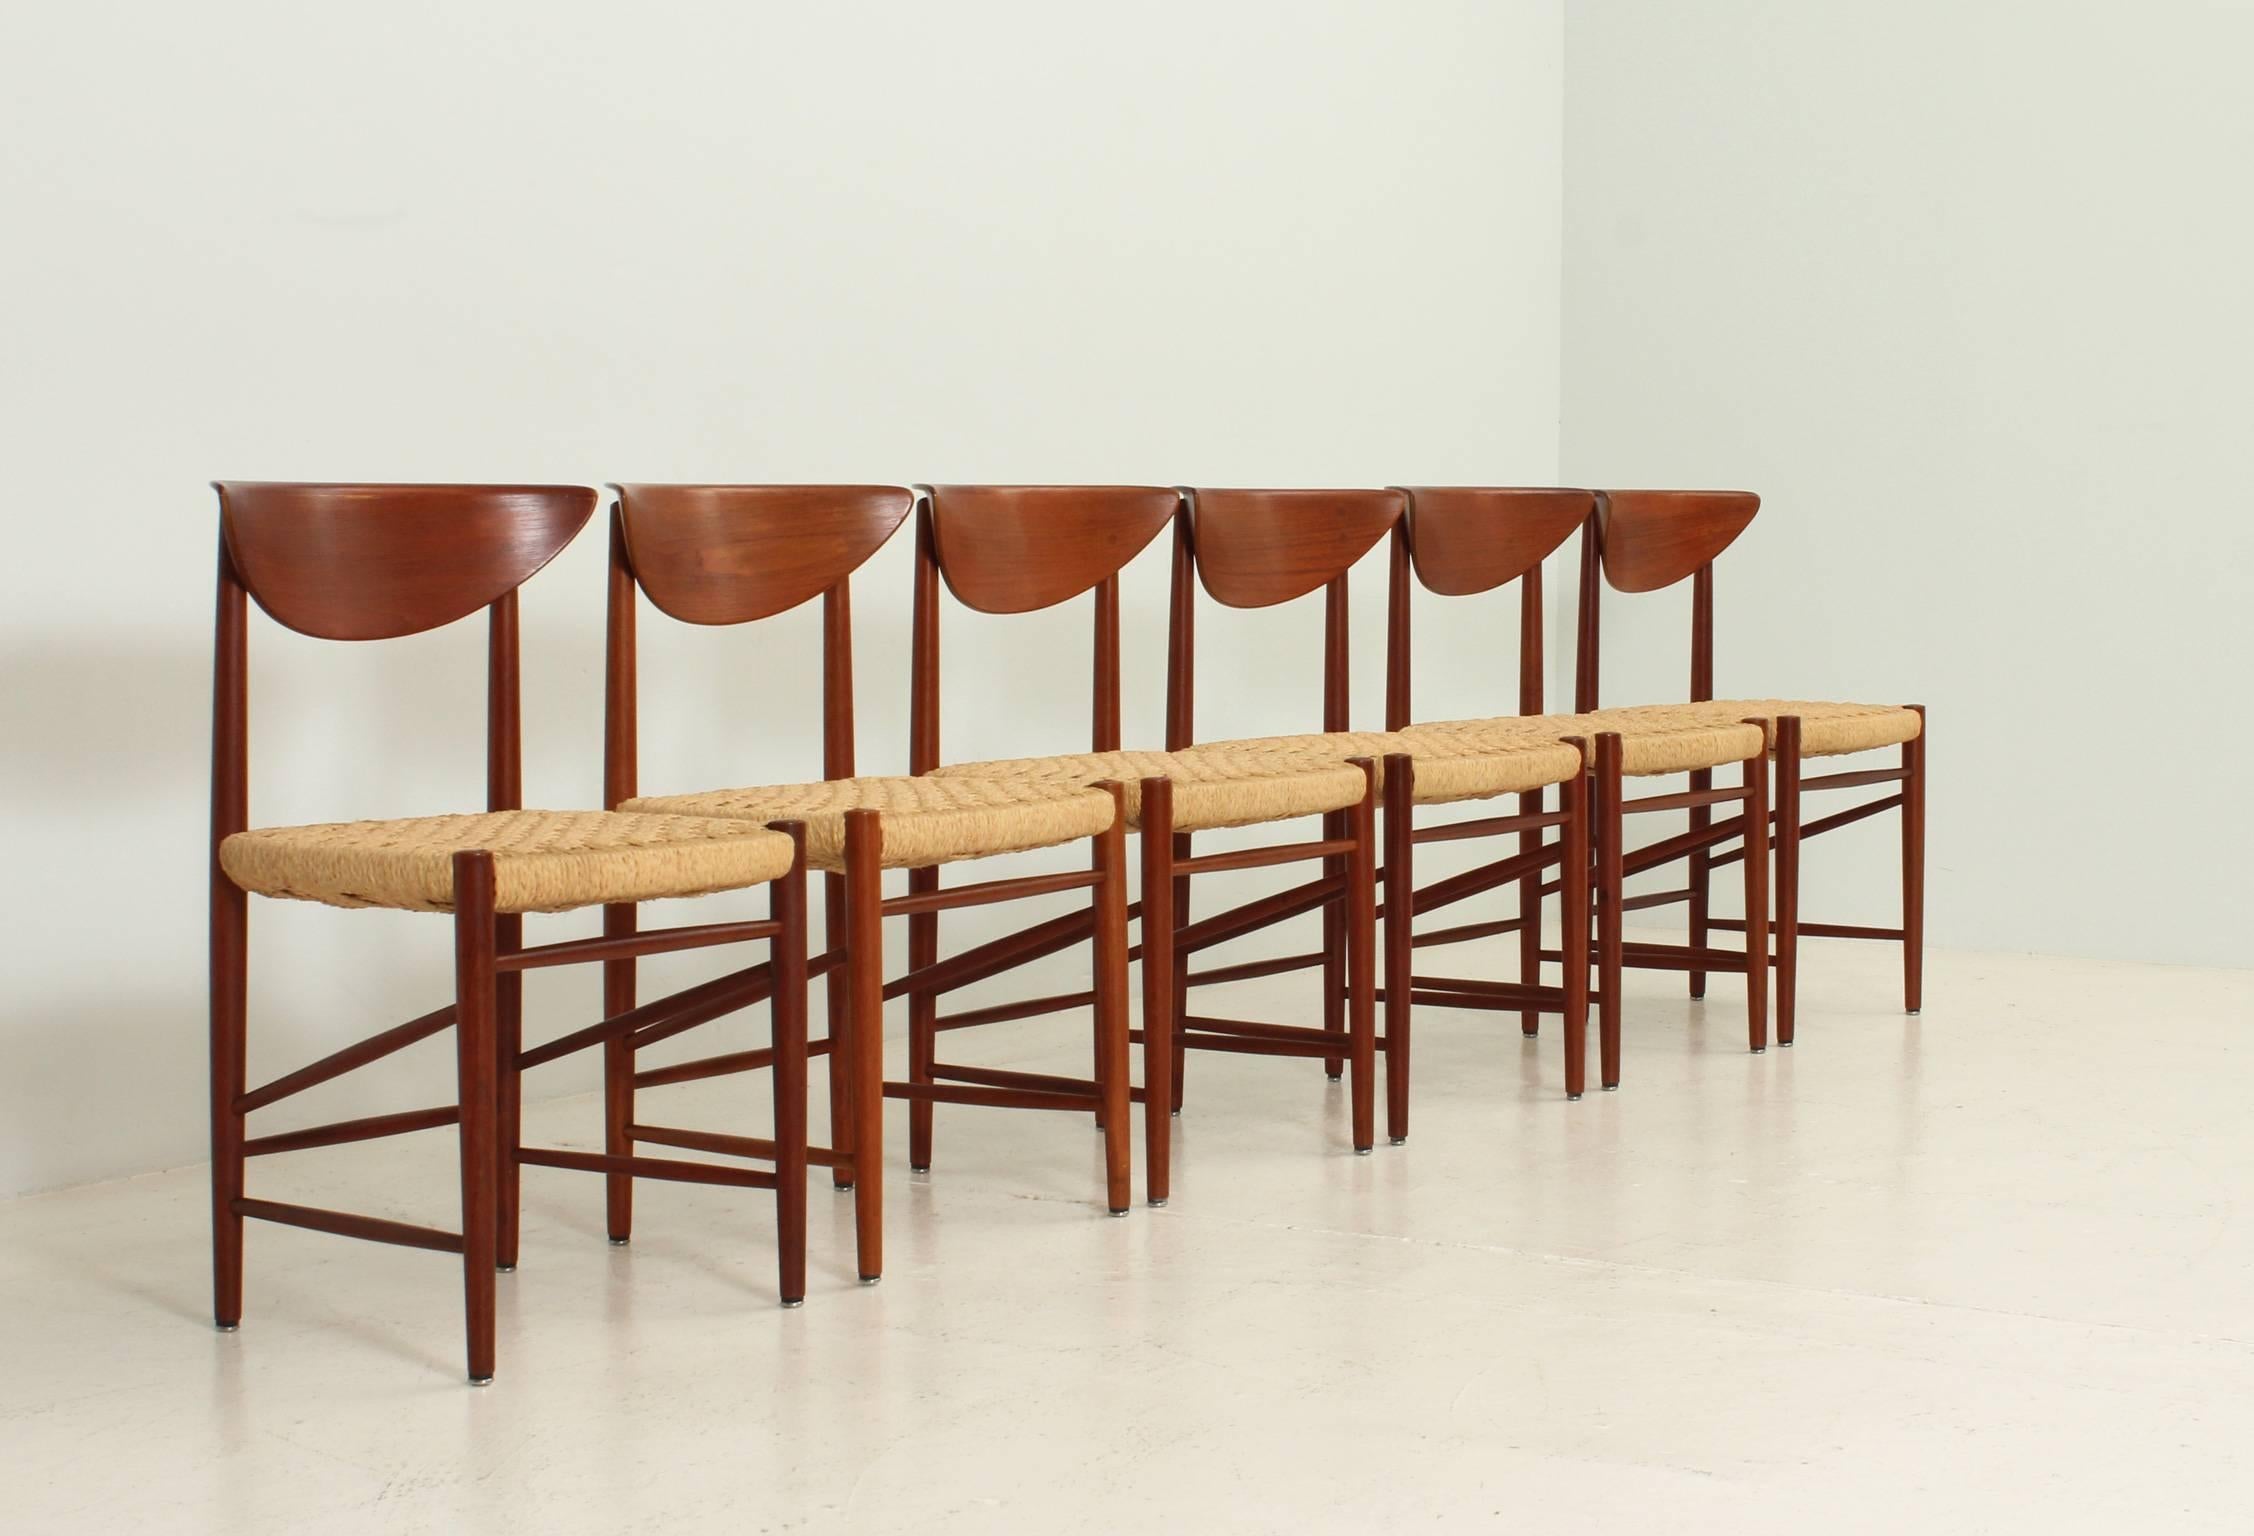 Set of six dining chairs model 316 designed by Danish designers Peter Hvidt and Orla Mølgaard-Nielsen in 1955 for Søborg Møbelfabrik. Teak wood and new woven cane seats.